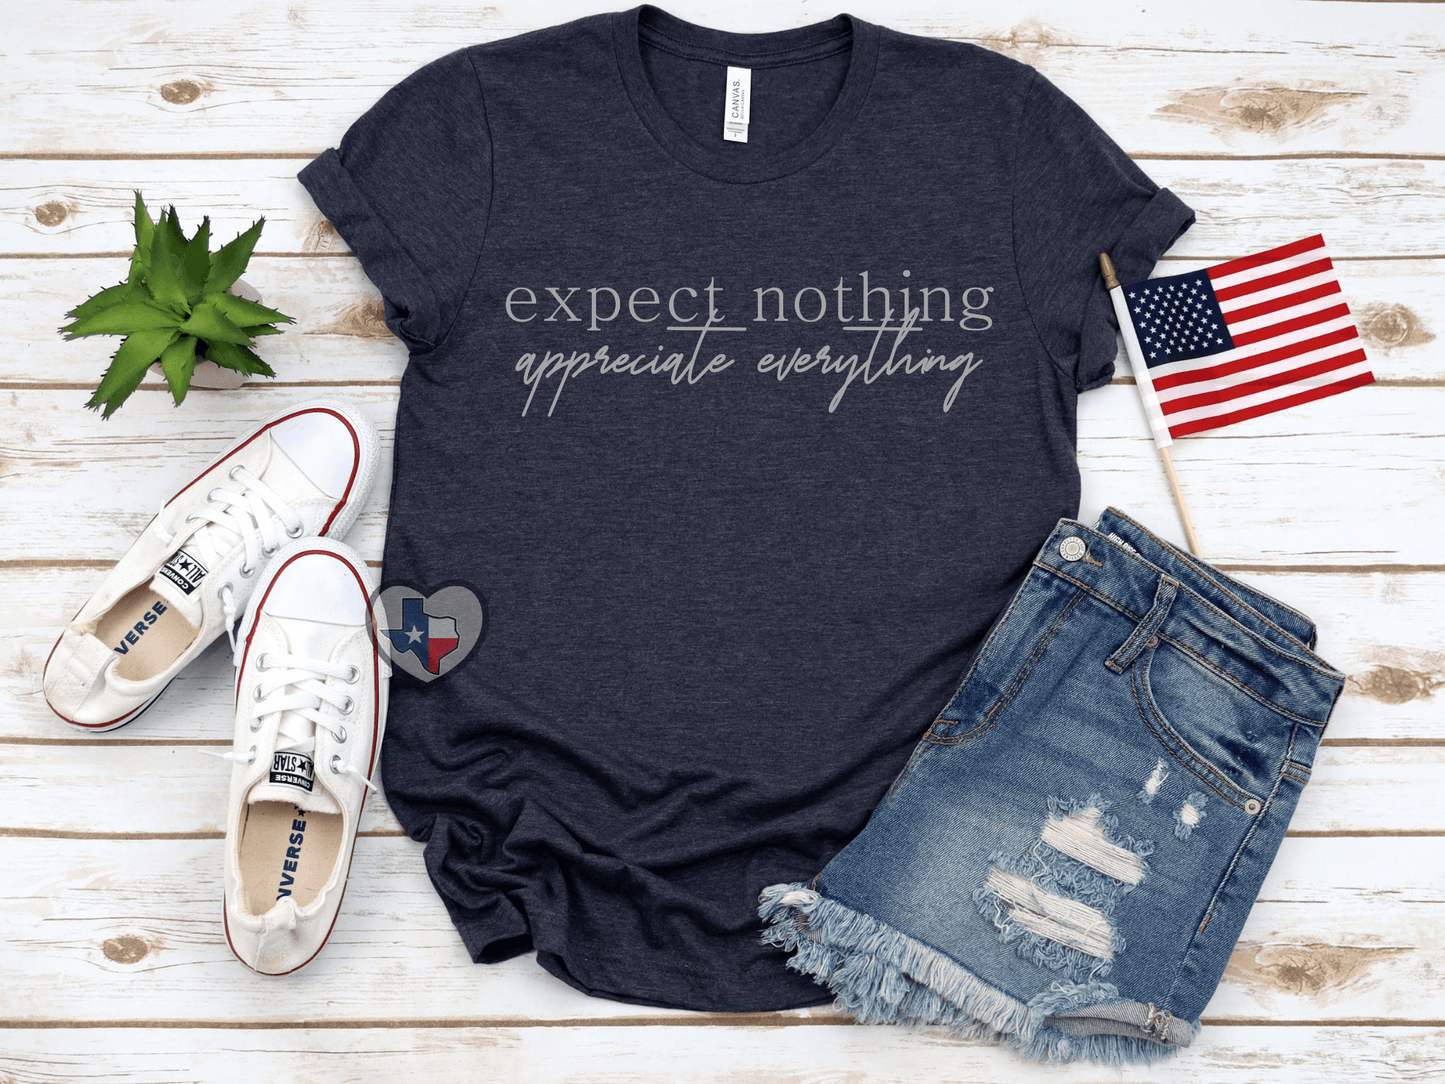 Expect Nothing (Metallic Silver) - Texas Transfers and Designs